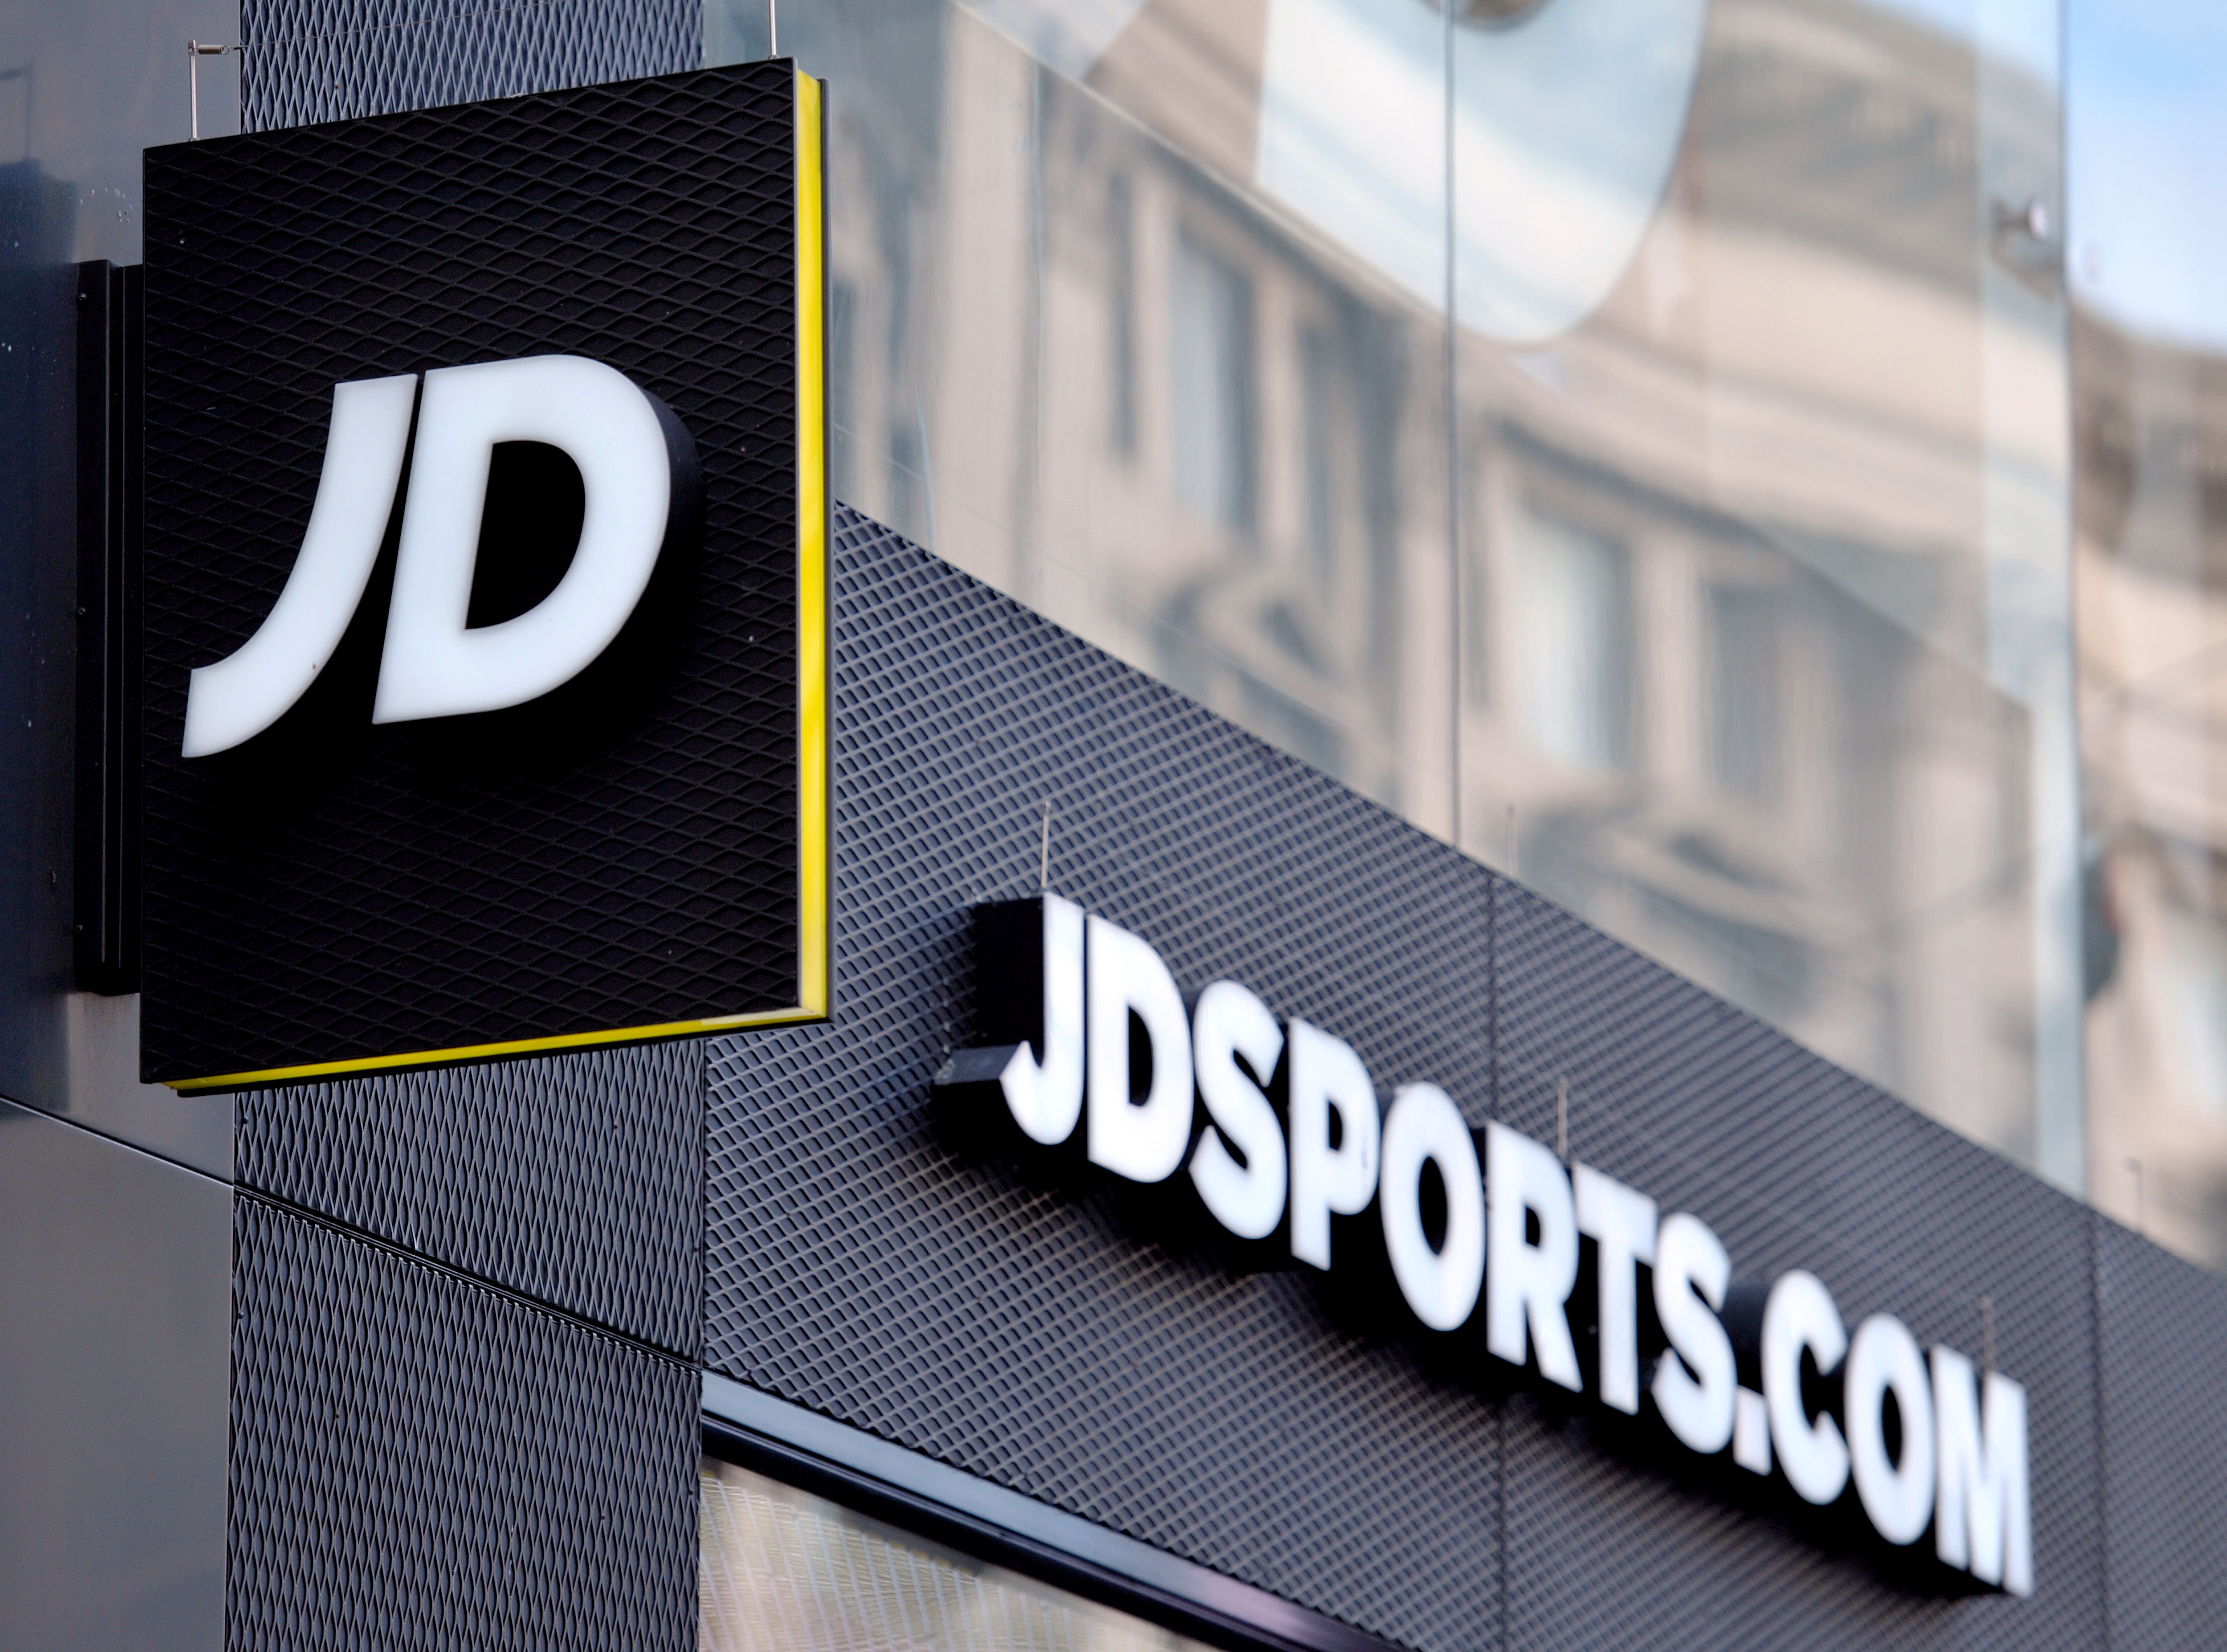 JD Sports announces corporate overhaul after exit of chair Peter Cowgill